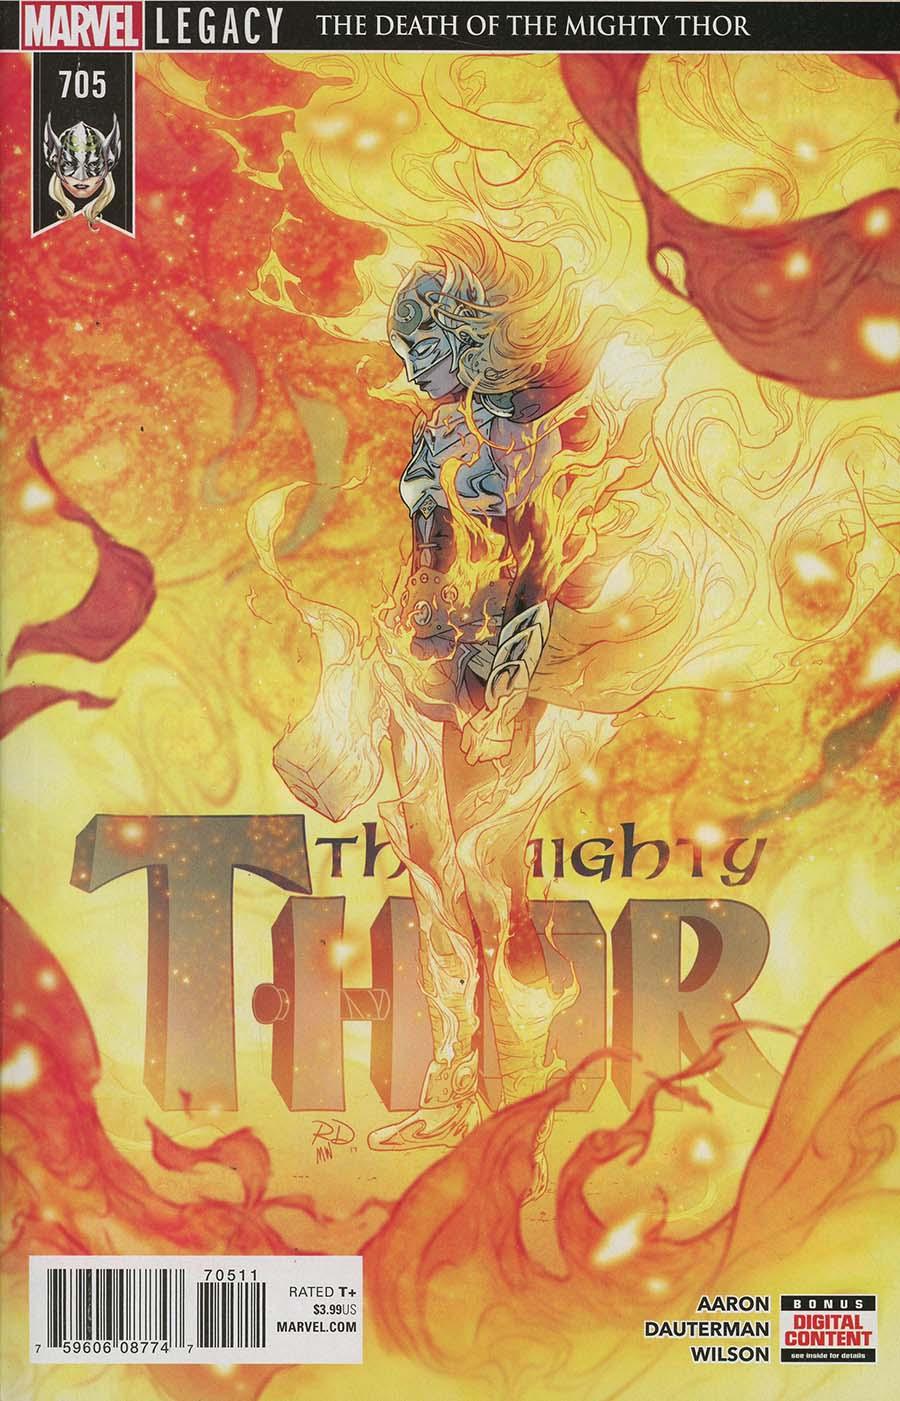 The Mighty Thor Vol. 2 #705